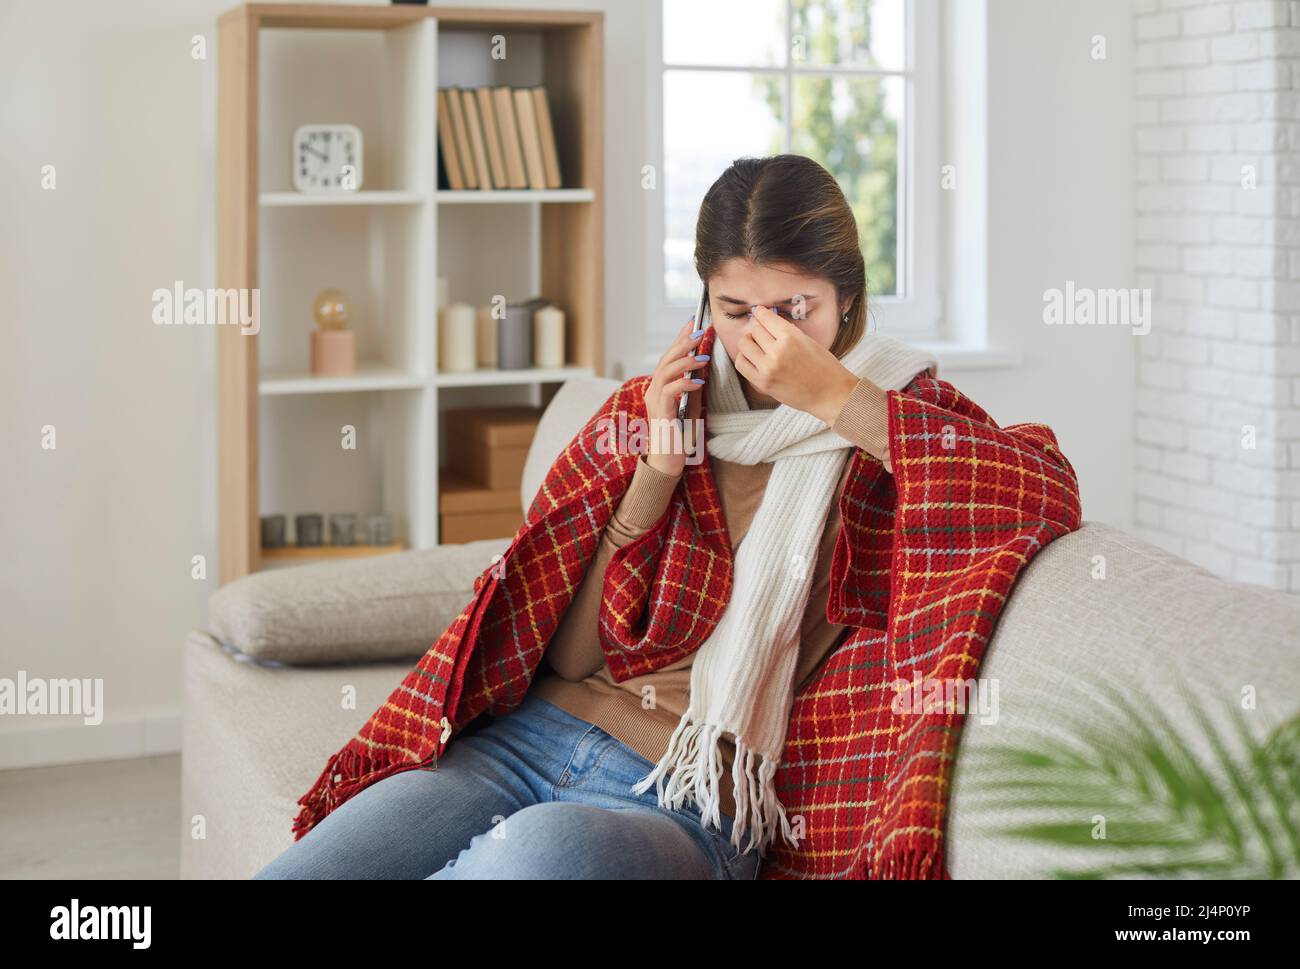 Woman who has caught cold or flu sitting on couch at home and talking to doctor on phone Stock Photo